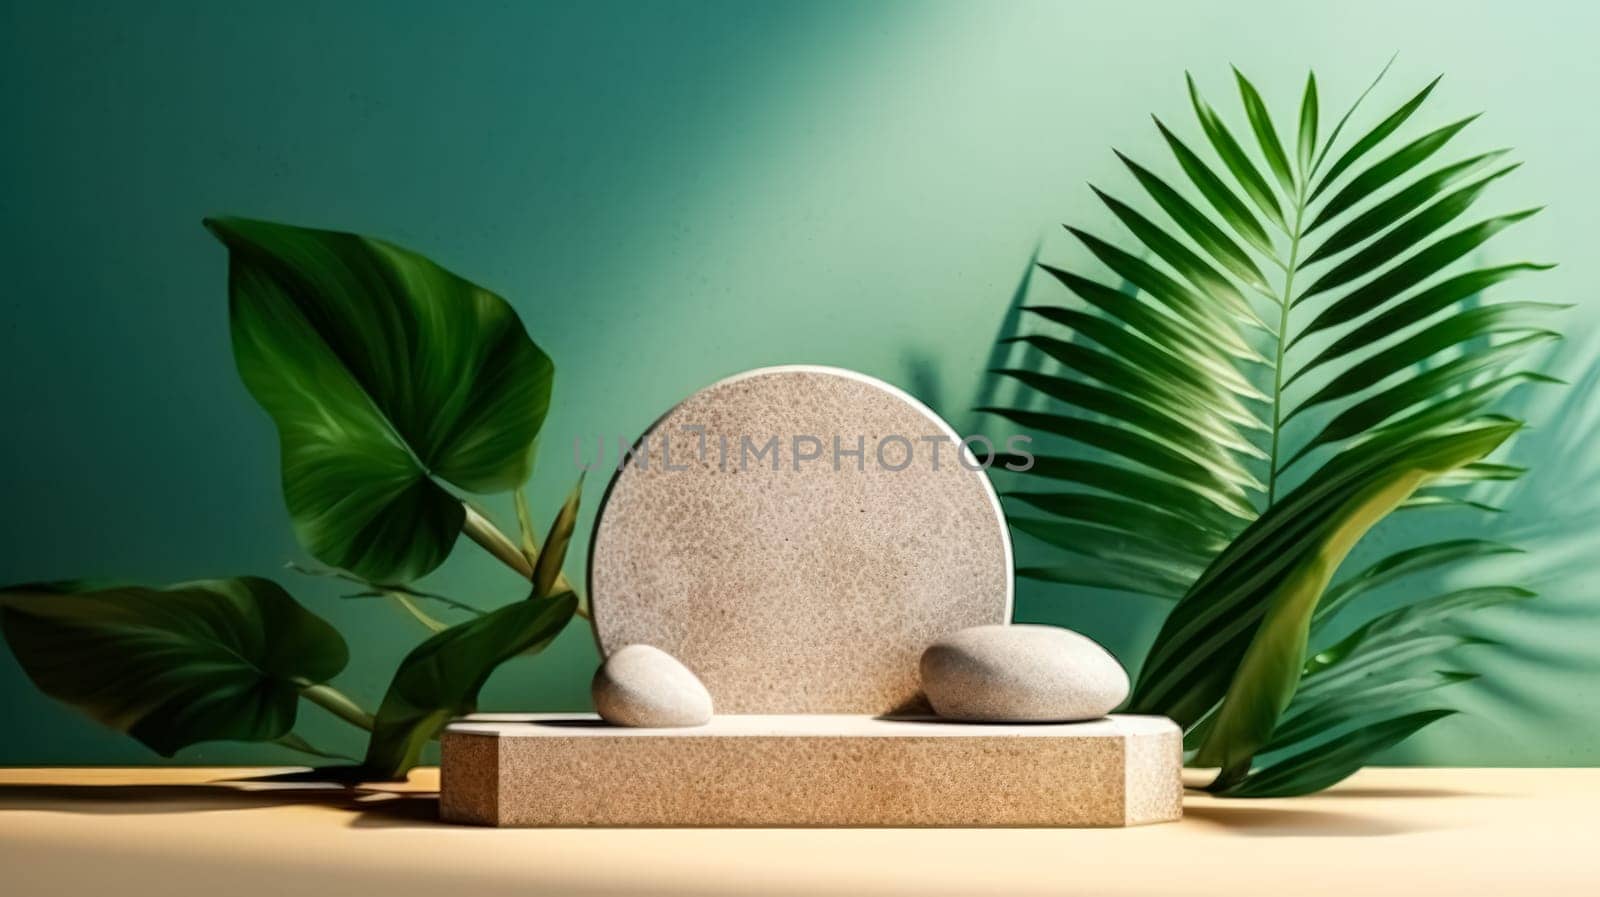 Concrete podium for cosmetics adorned with lush tropical leaves on a vibrant green background. Elevate your product presentation with this stylish and tropical design.